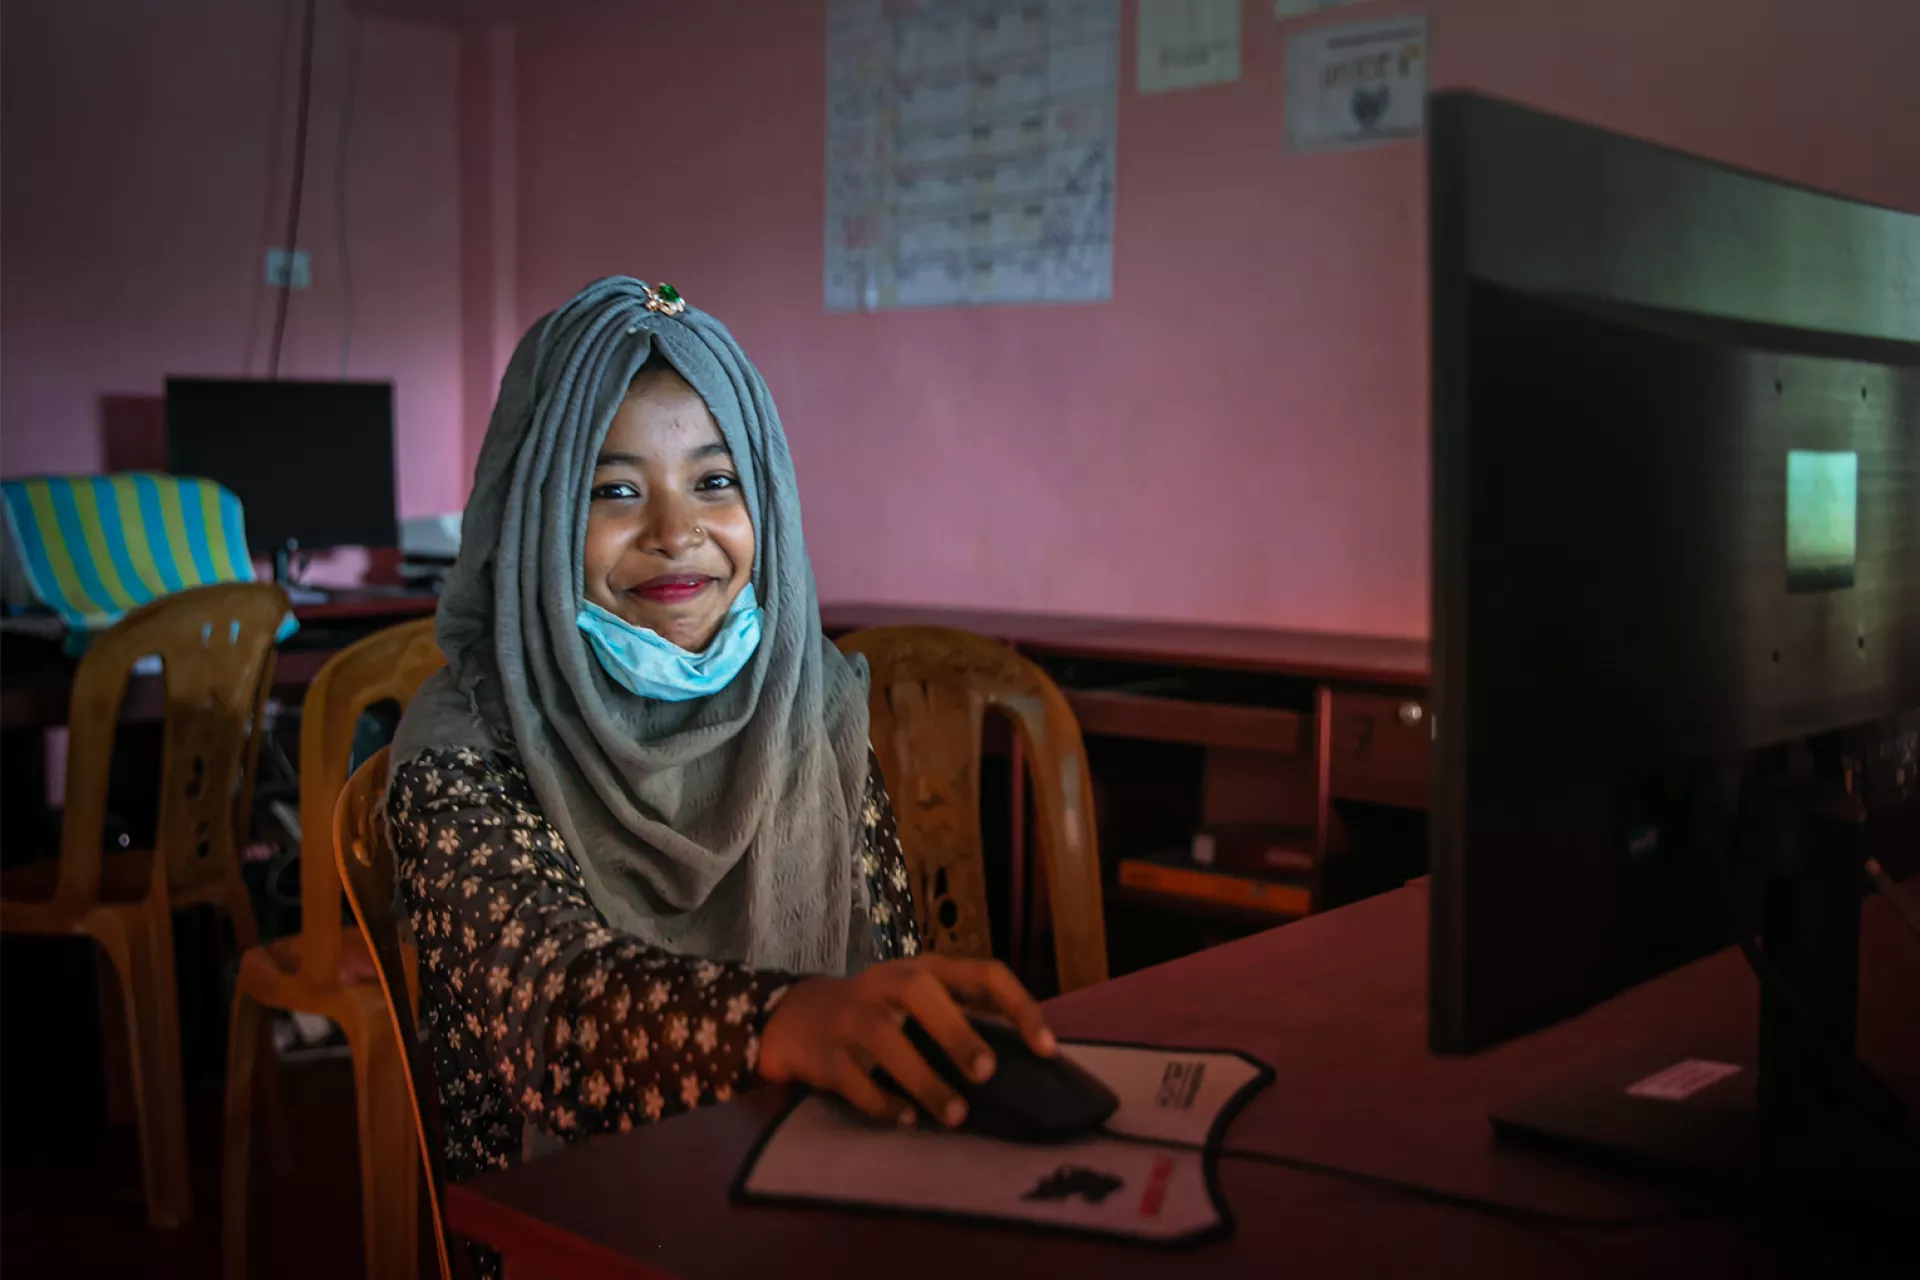 A young girl from Bangladesh is operating a computer